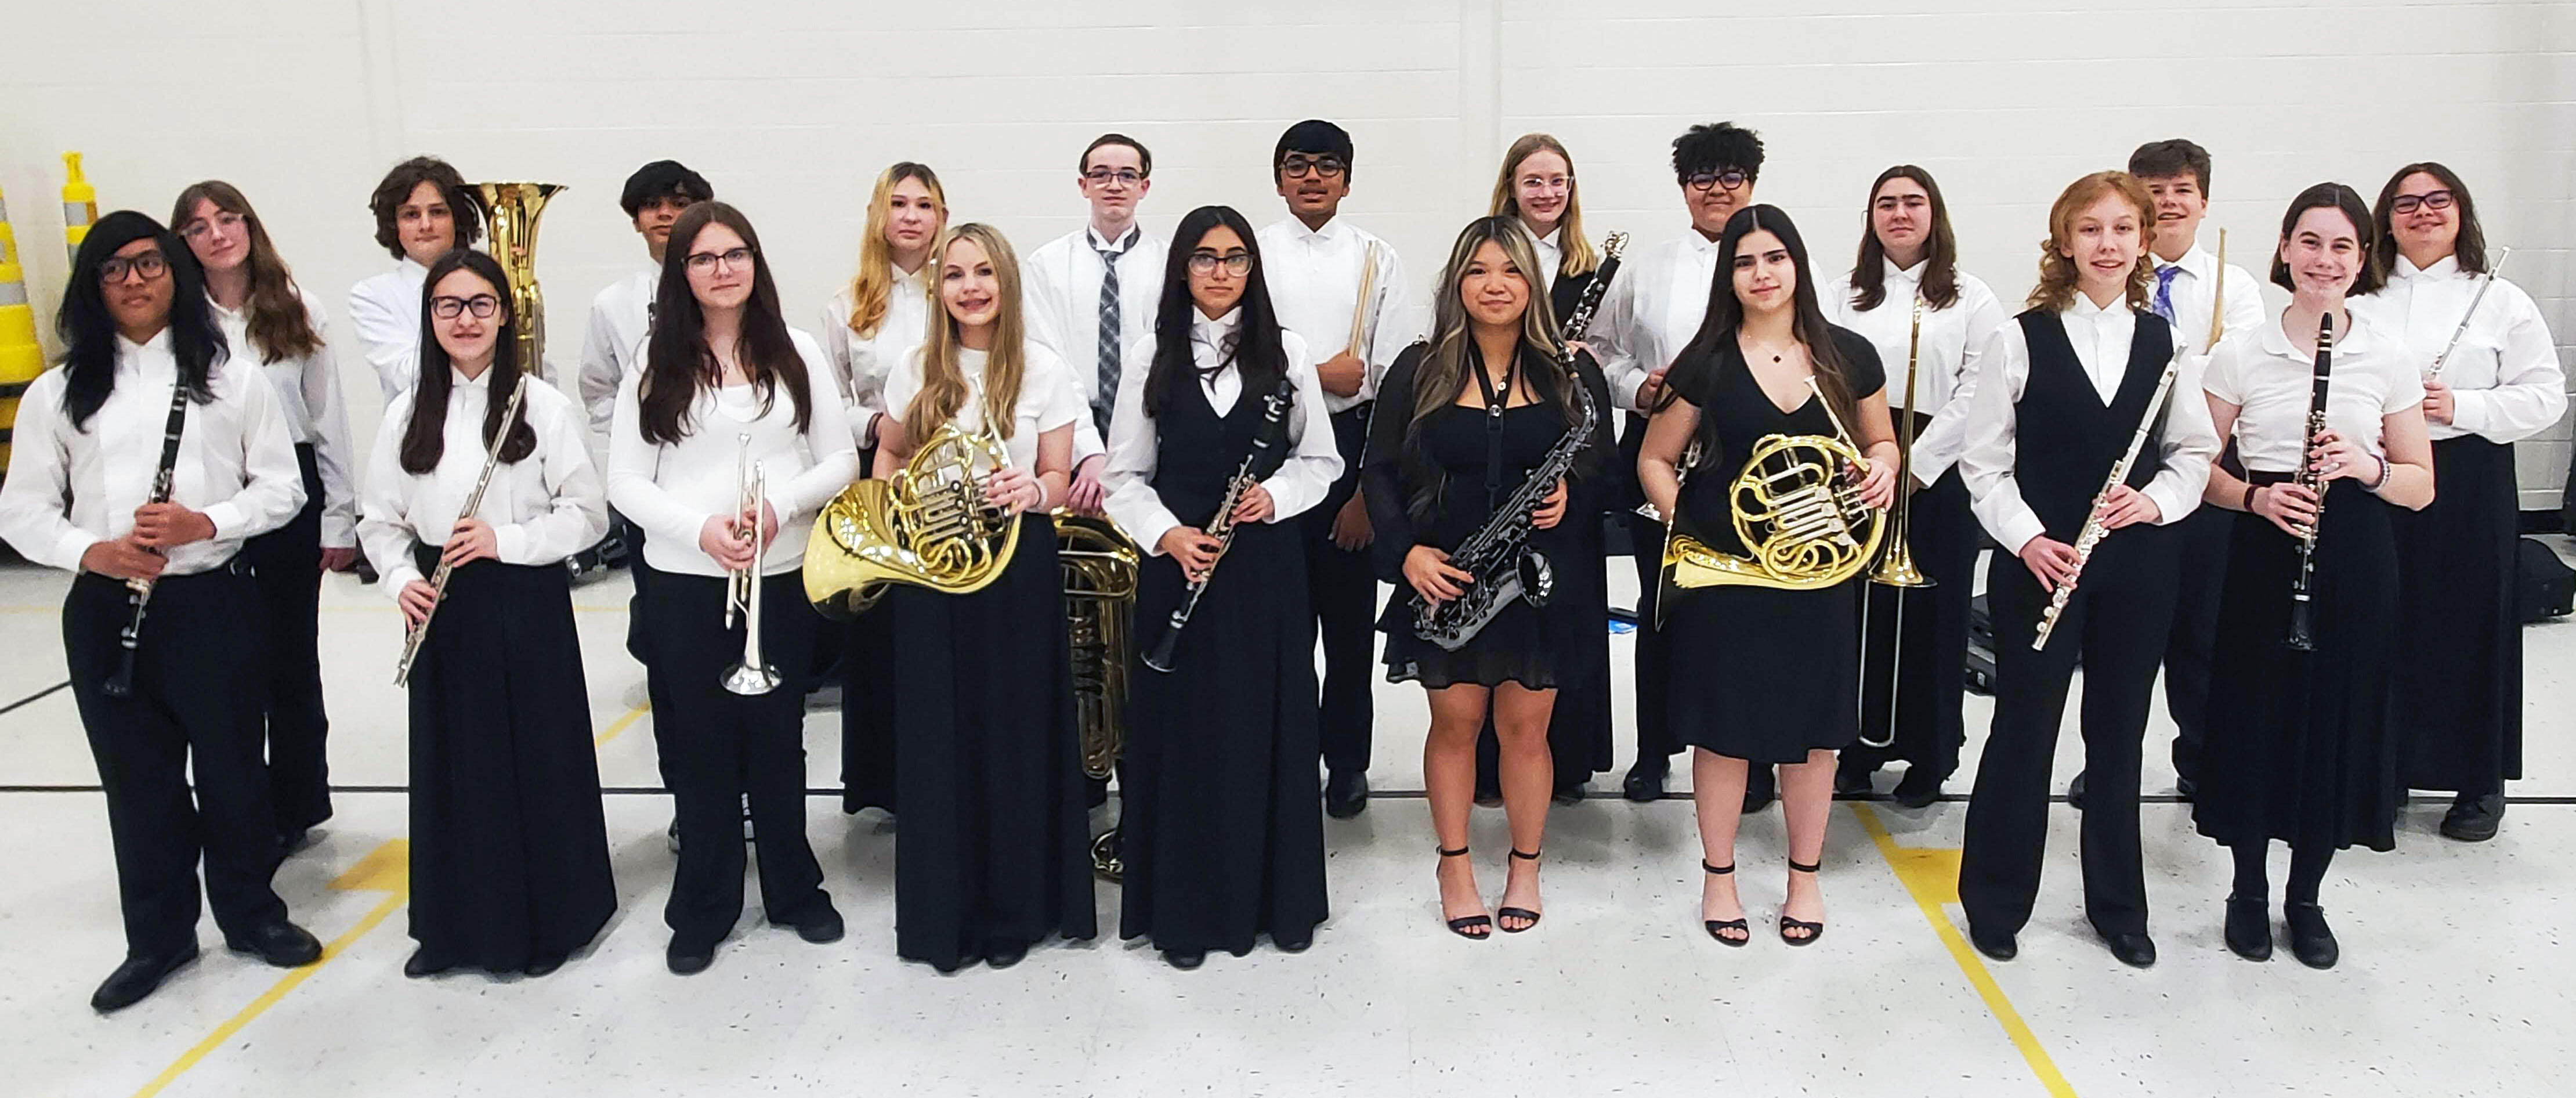 KSD 140 Honor Band students pose proudly with instruments before concert performance